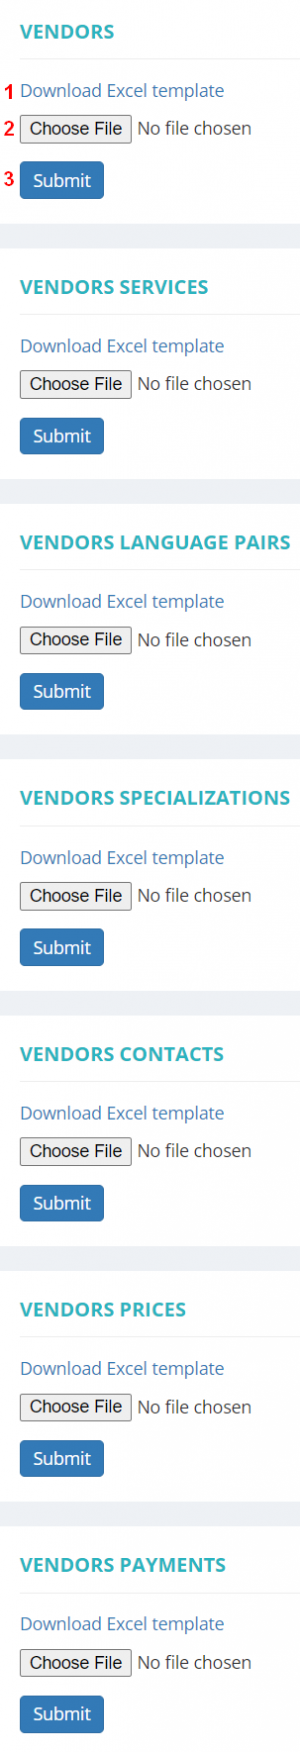 Import vendors from excel.png